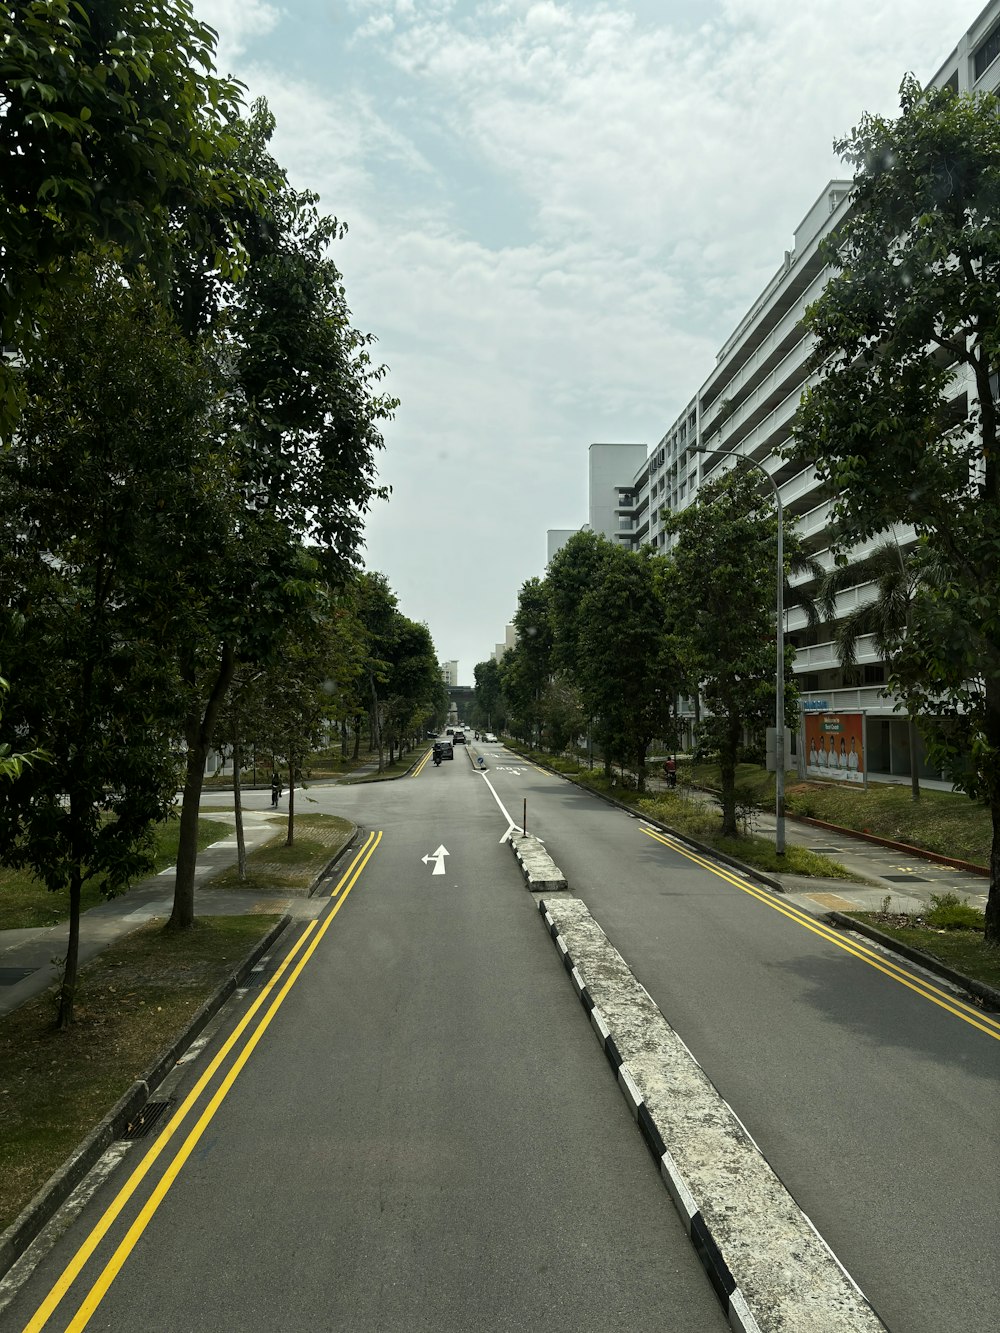 a long empty street with trees and buildings in the background